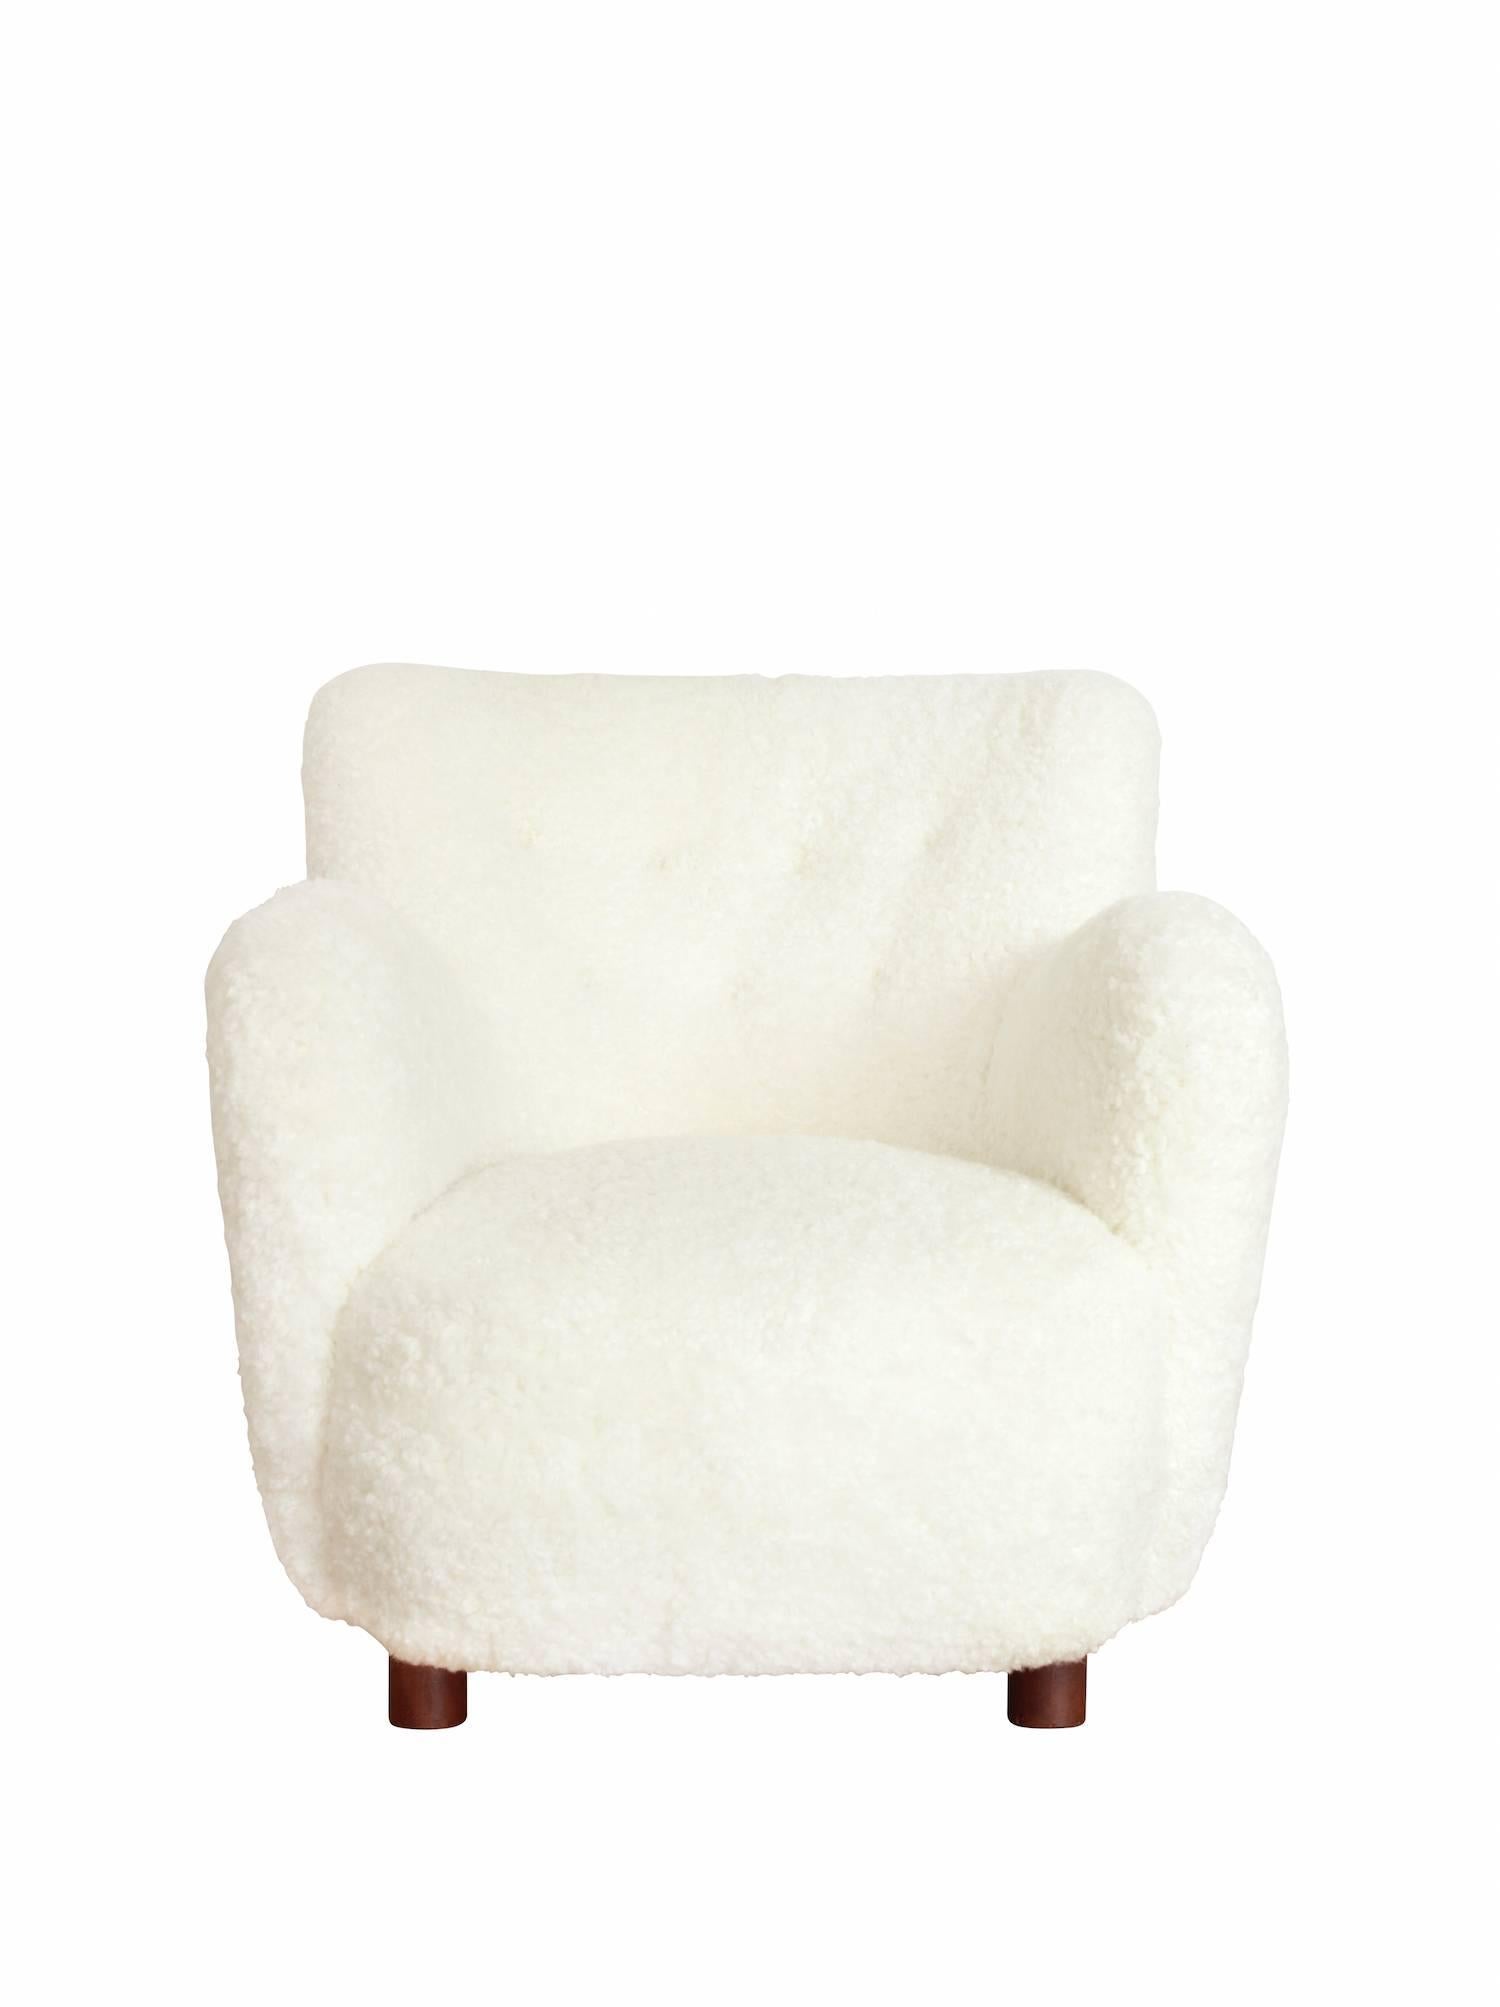 Free standing lounge chair upholstered with white sheepskin, raised on round legs of beech.